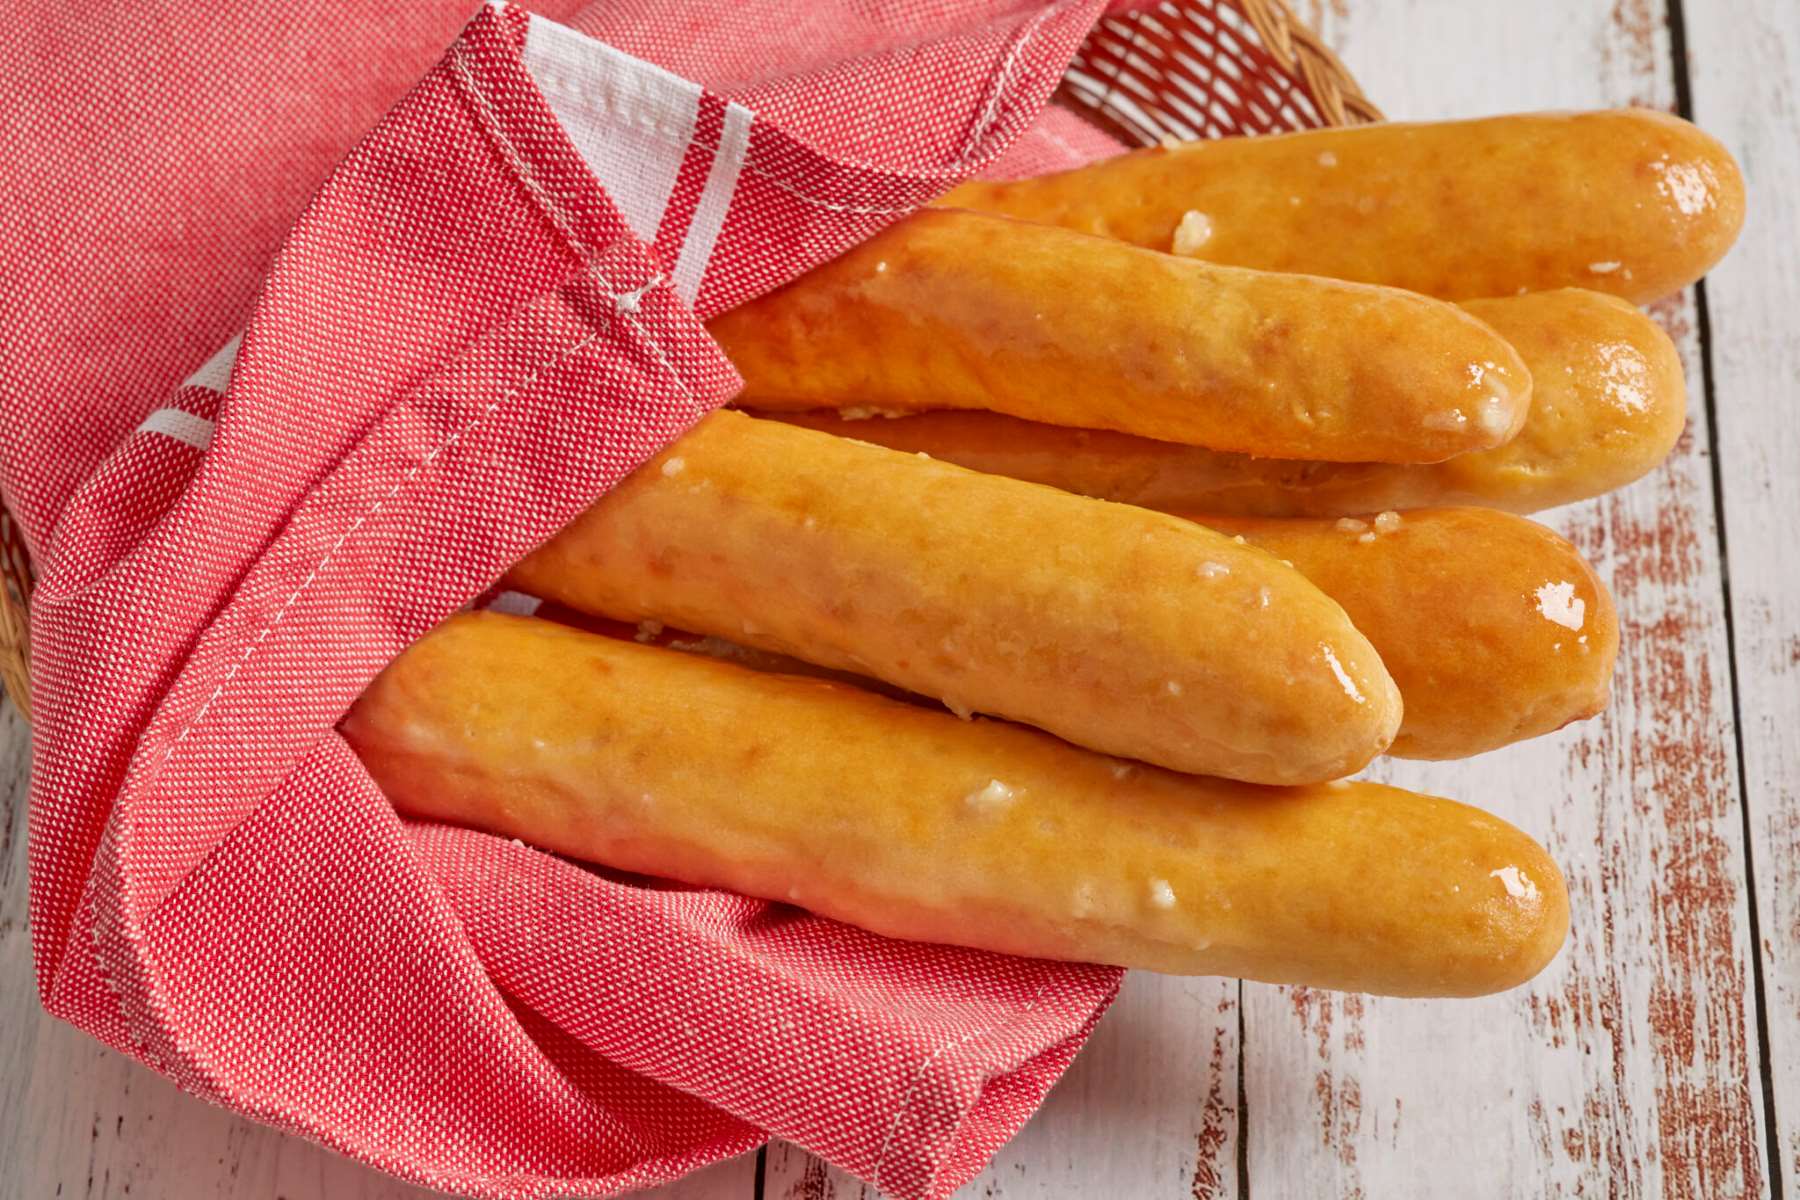 18-breadsticks-nutrition-facts